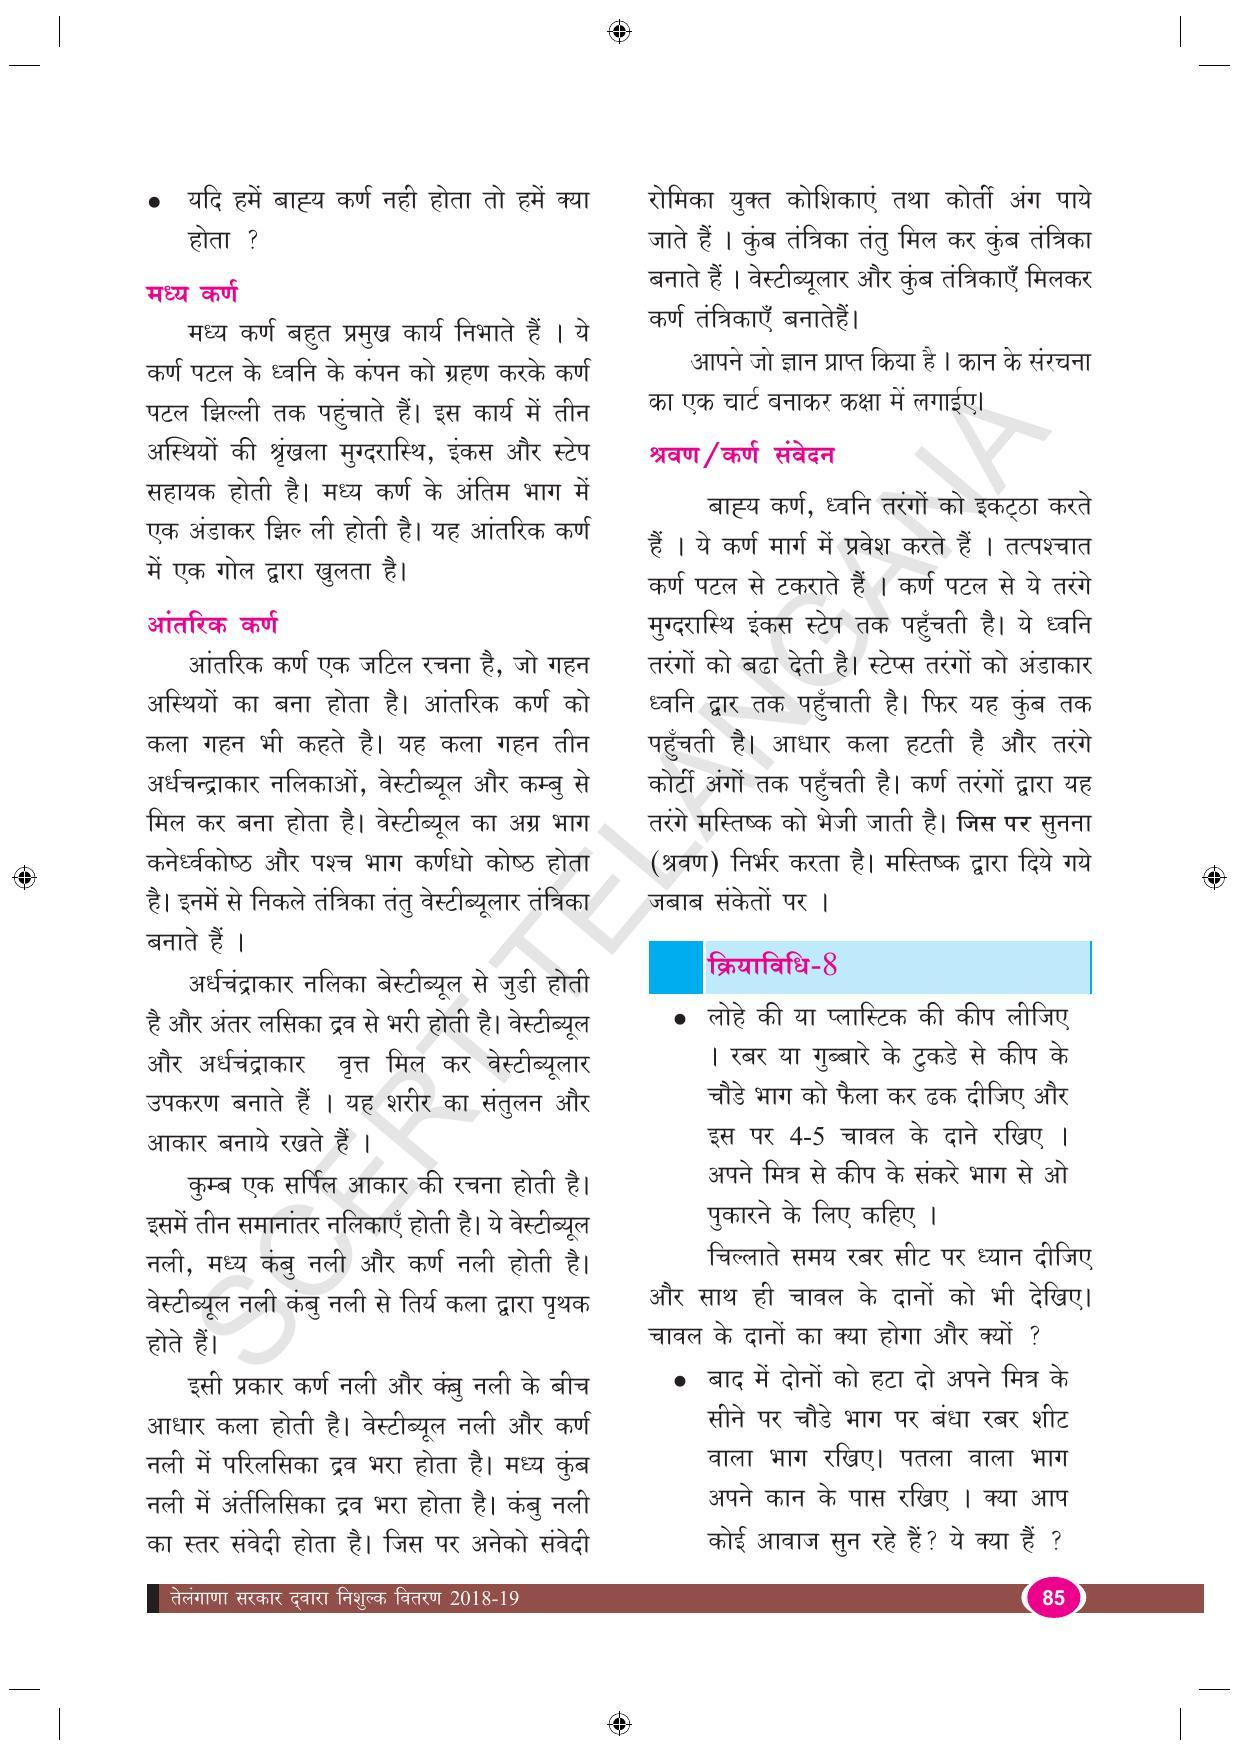 TS SCERT Class 9 Biological Science (Hindi Medium) Text Book - Page 97